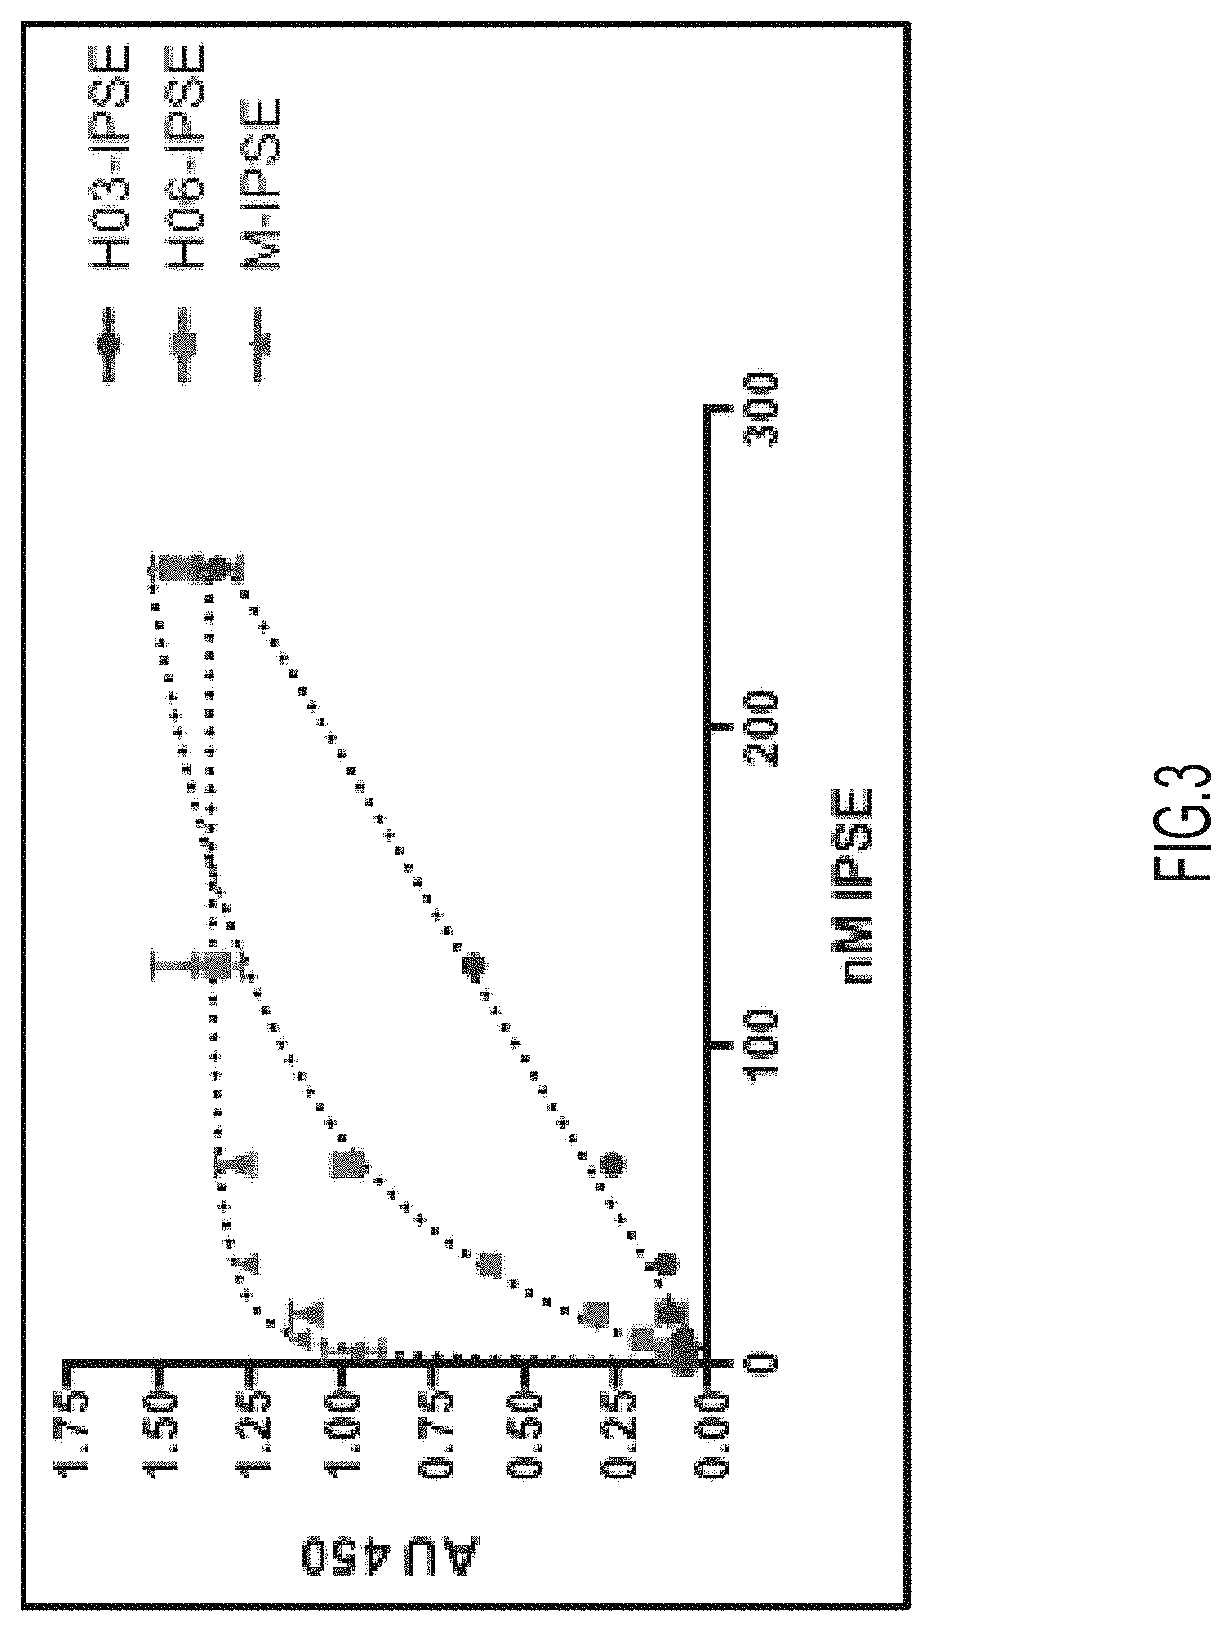 Use of interleukin-4-inducing principle of <i>Schistosoma mansoni </i>eggs for treating pain, interstitial cystitis and/or overactive bladder